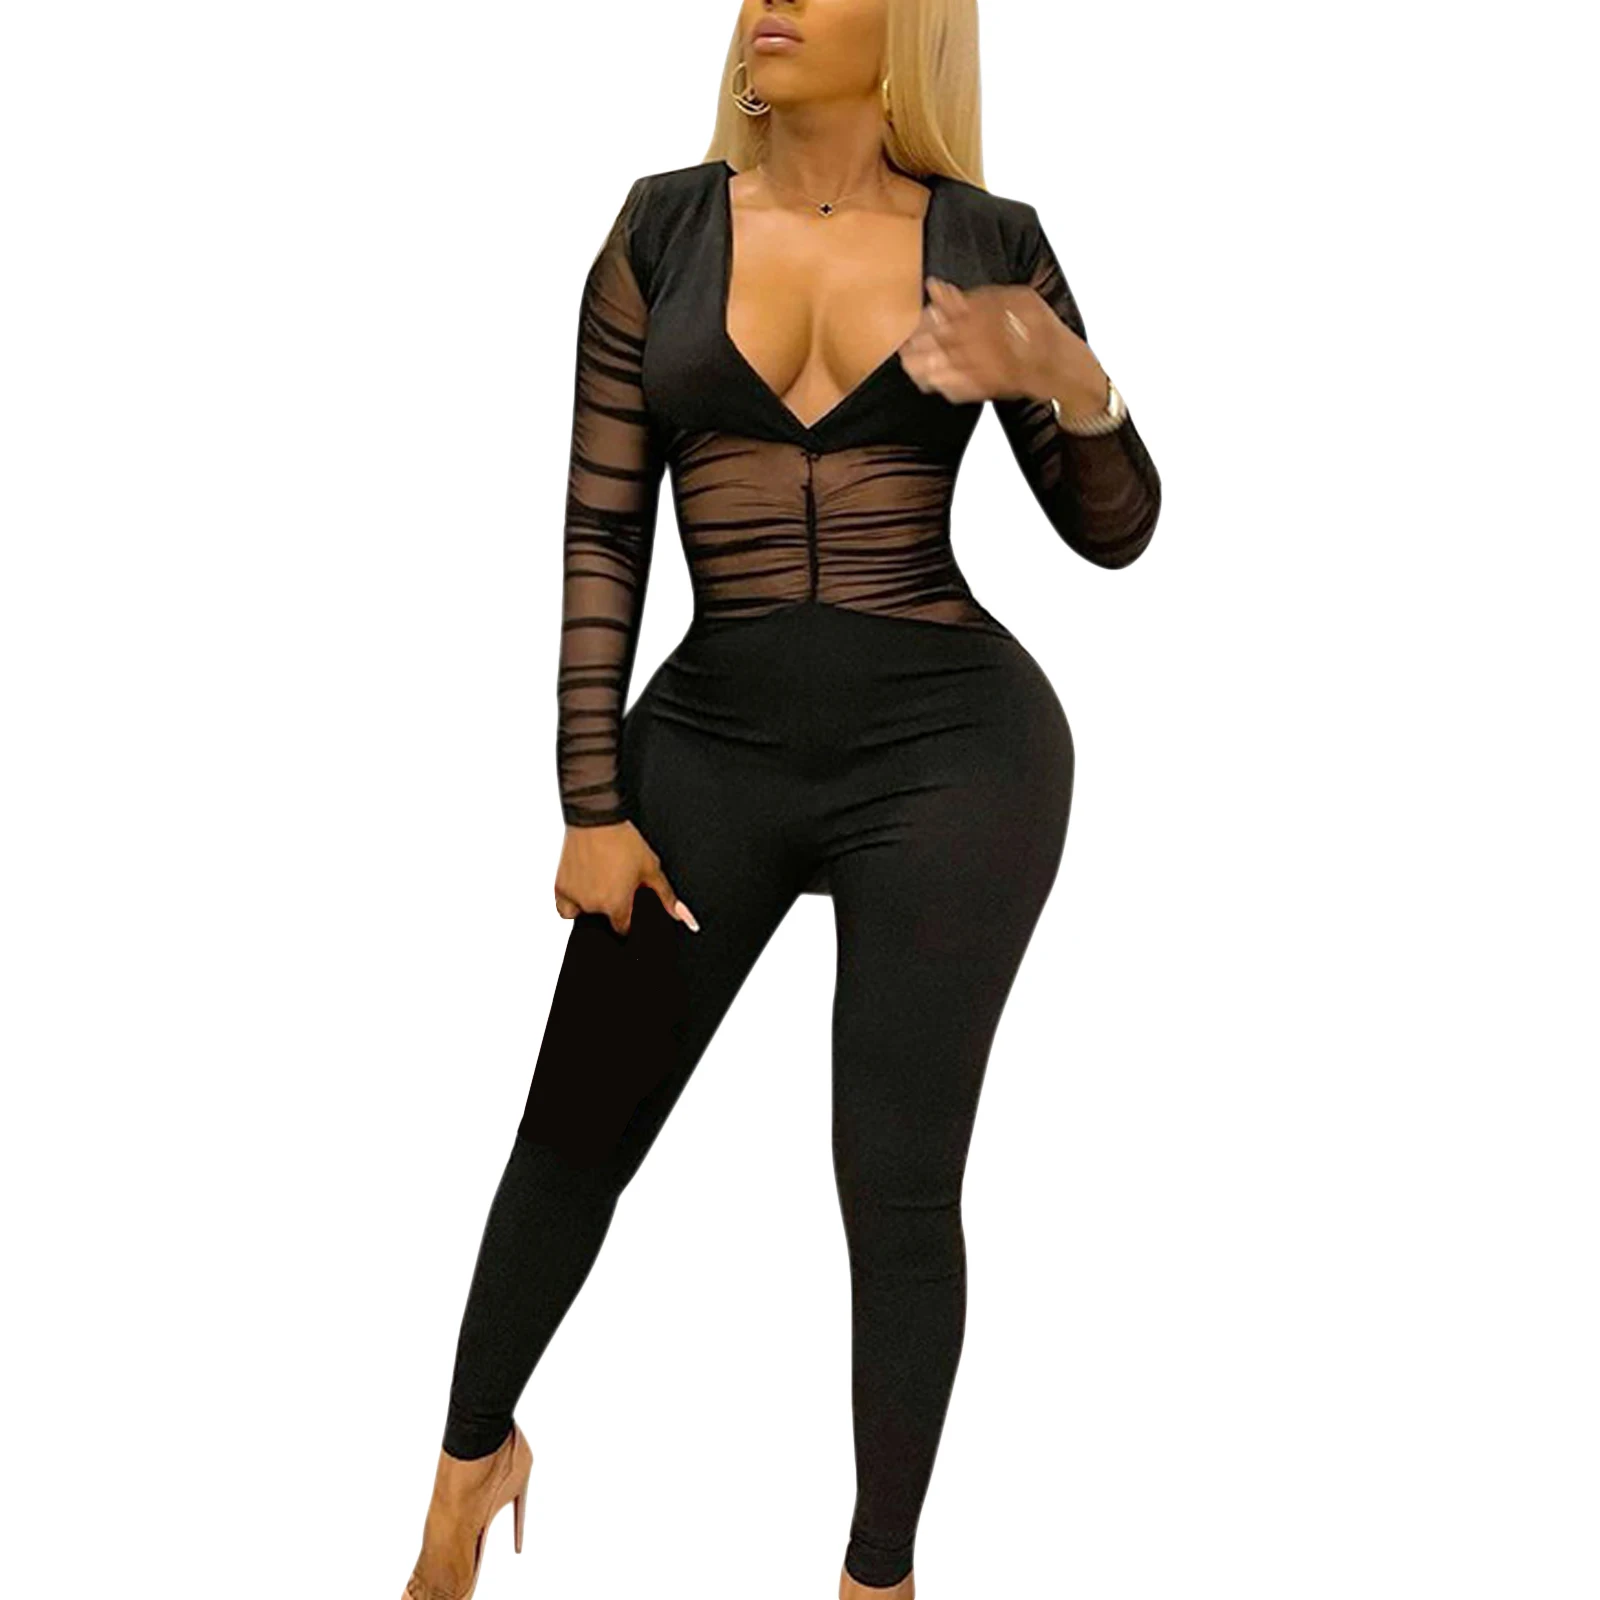 

Women Sexy Close-fitting Polyester Jumpsuit Black Solid Color Long Sleeve Plunging Neckline See-through Overalls S/ M/ L